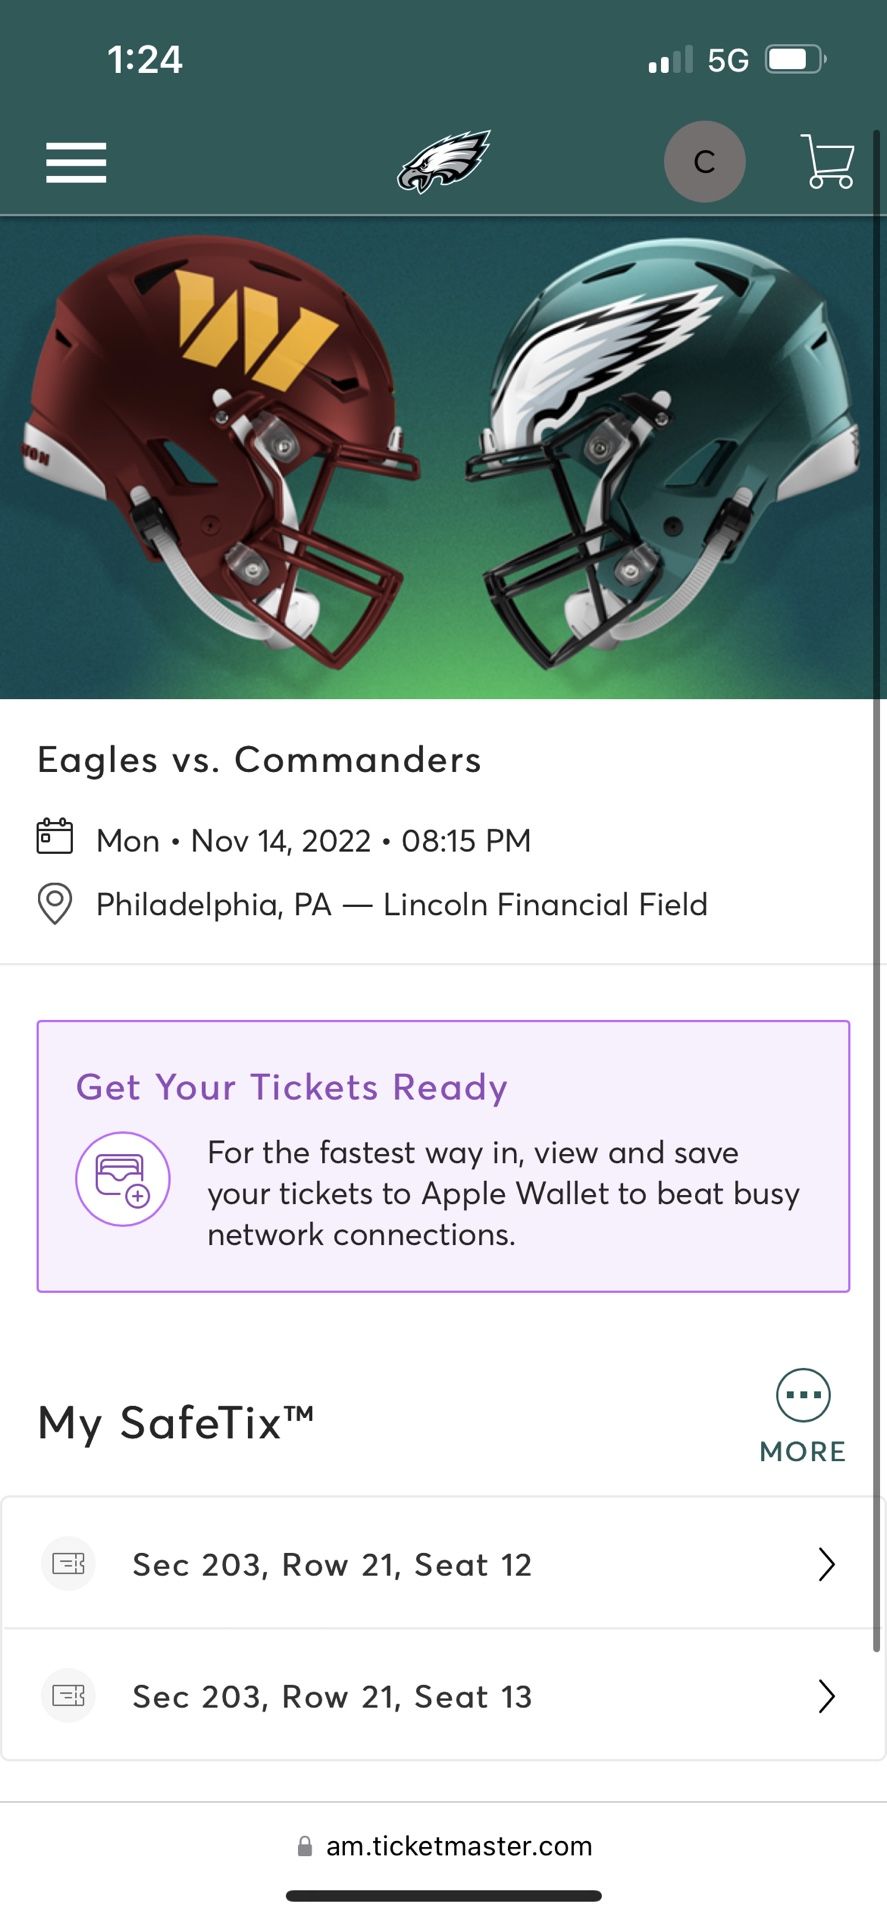 2 tickets to Eagles vs. Redskins